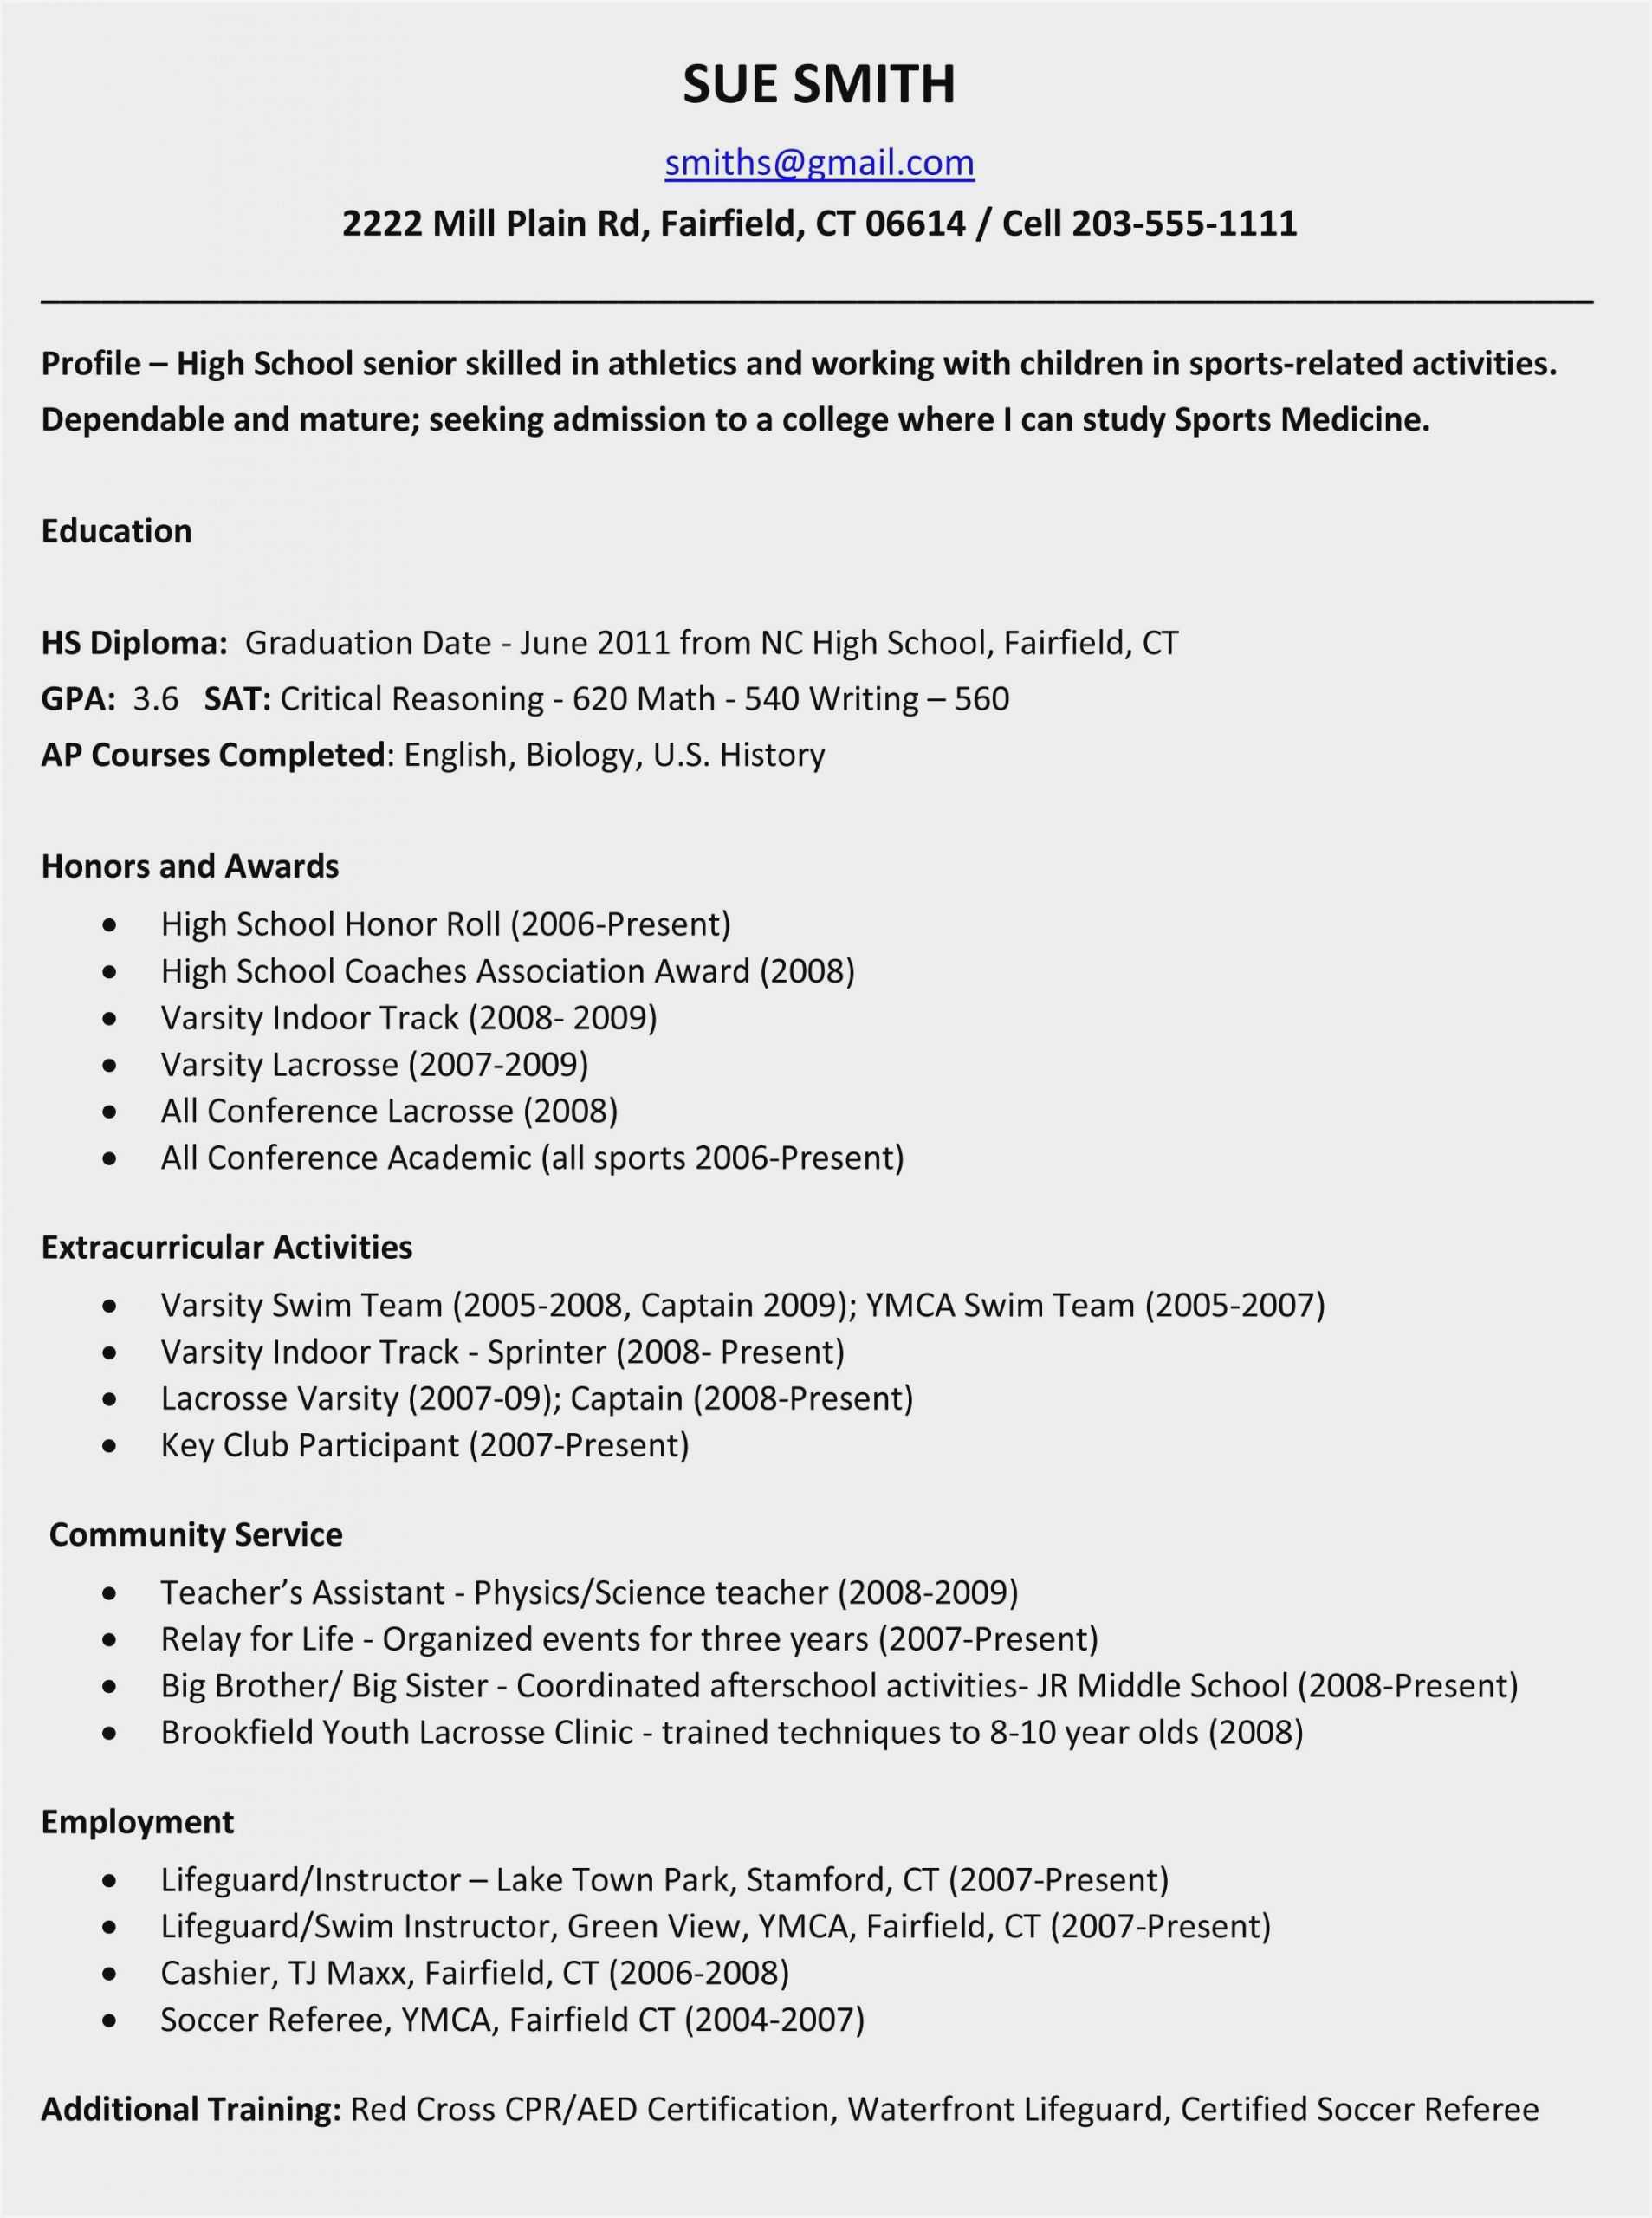 Free Cv Template For High School Student – Resume : Resume With College Student Resume Template Microsoft Word